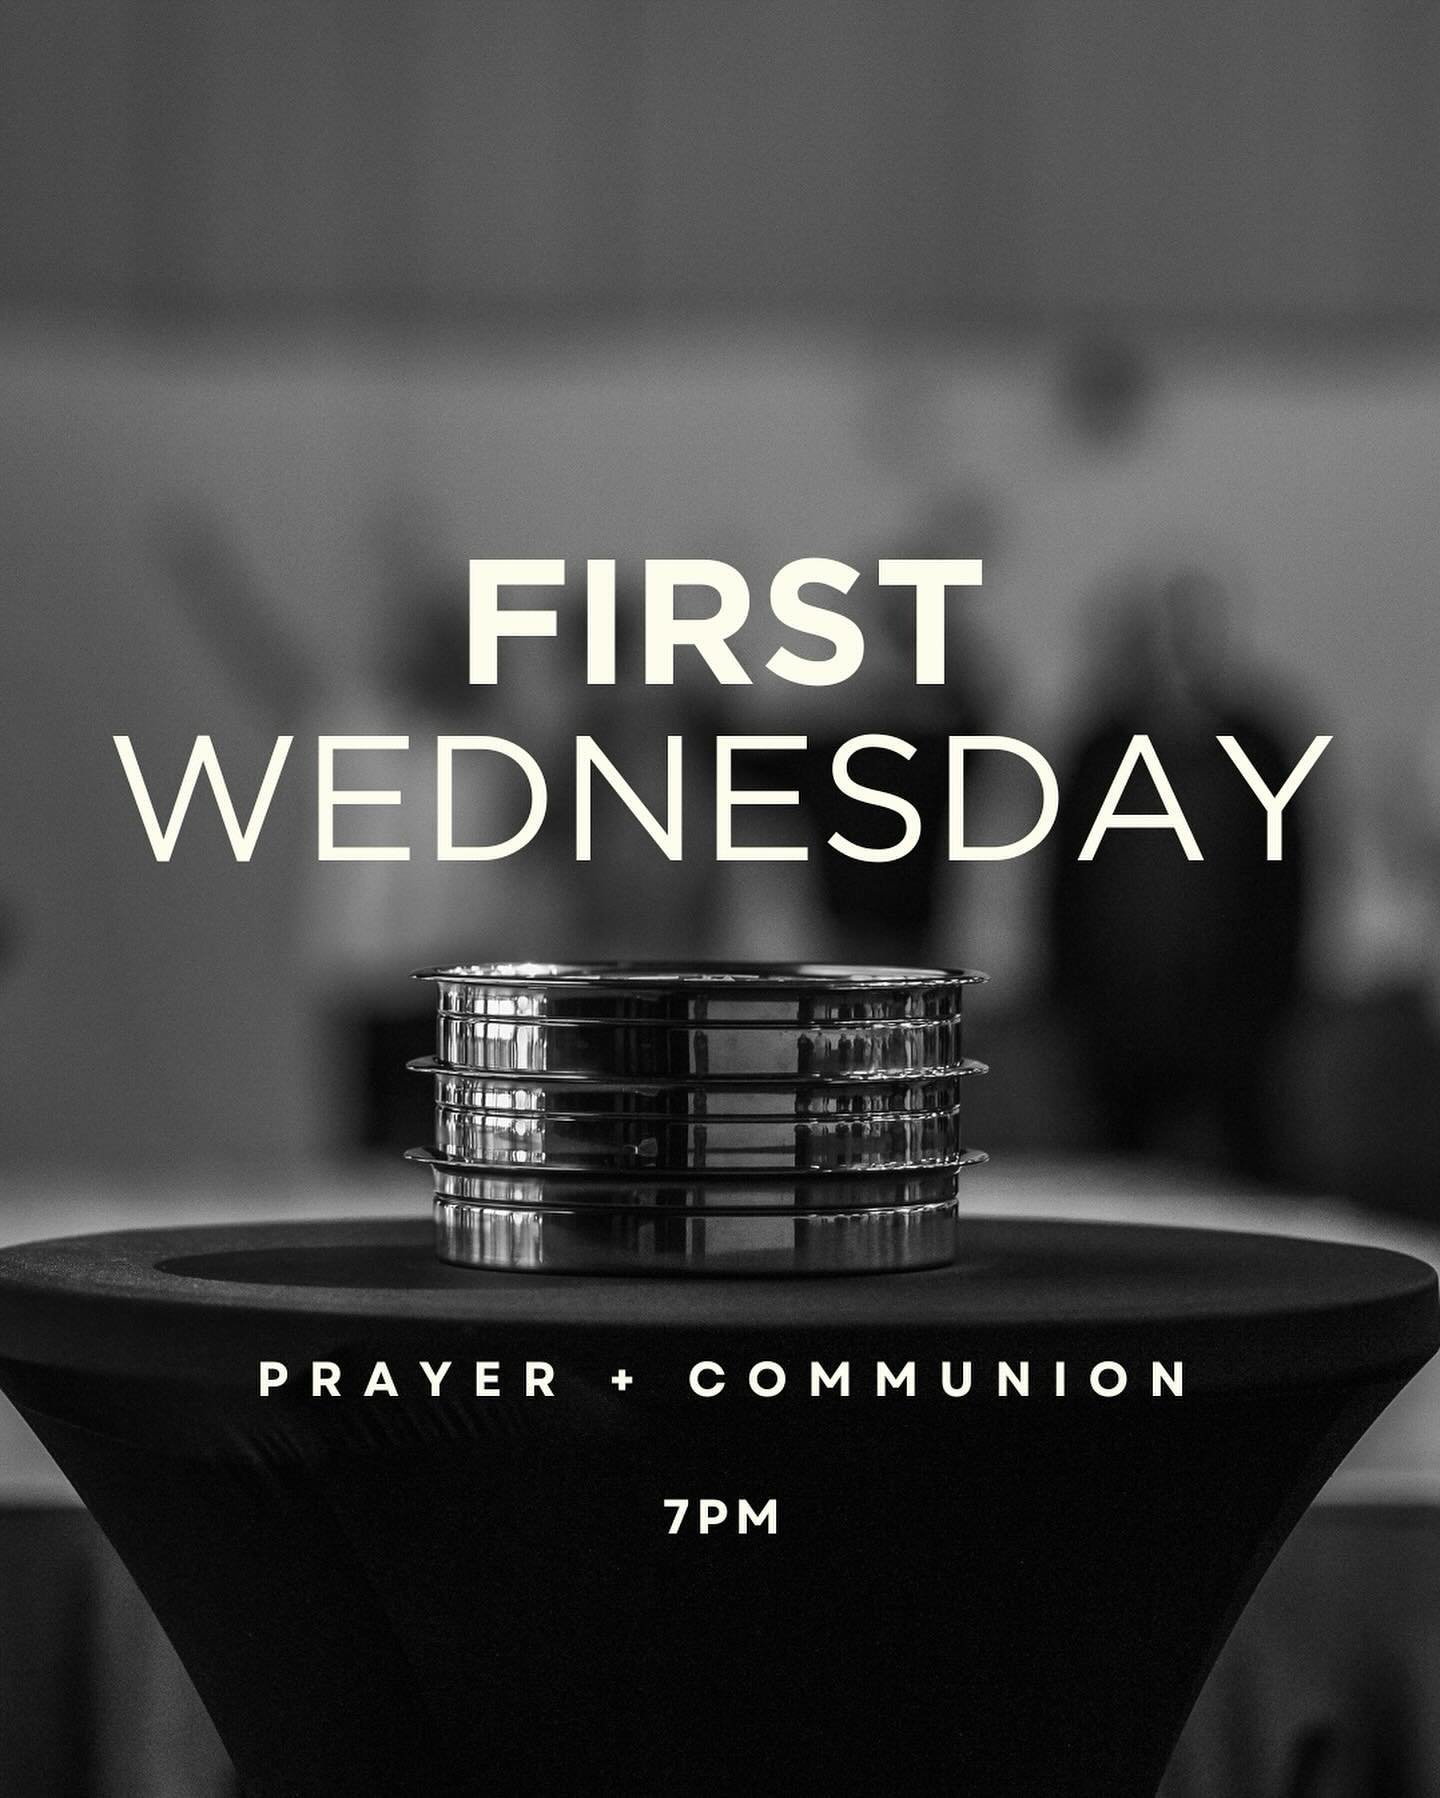 First Wednesday Prayer TONIGHT at 7pm!

Join us for a time of worship, prayer, and communion. See you there!!

#prayer #worship #firstwednesday #communion